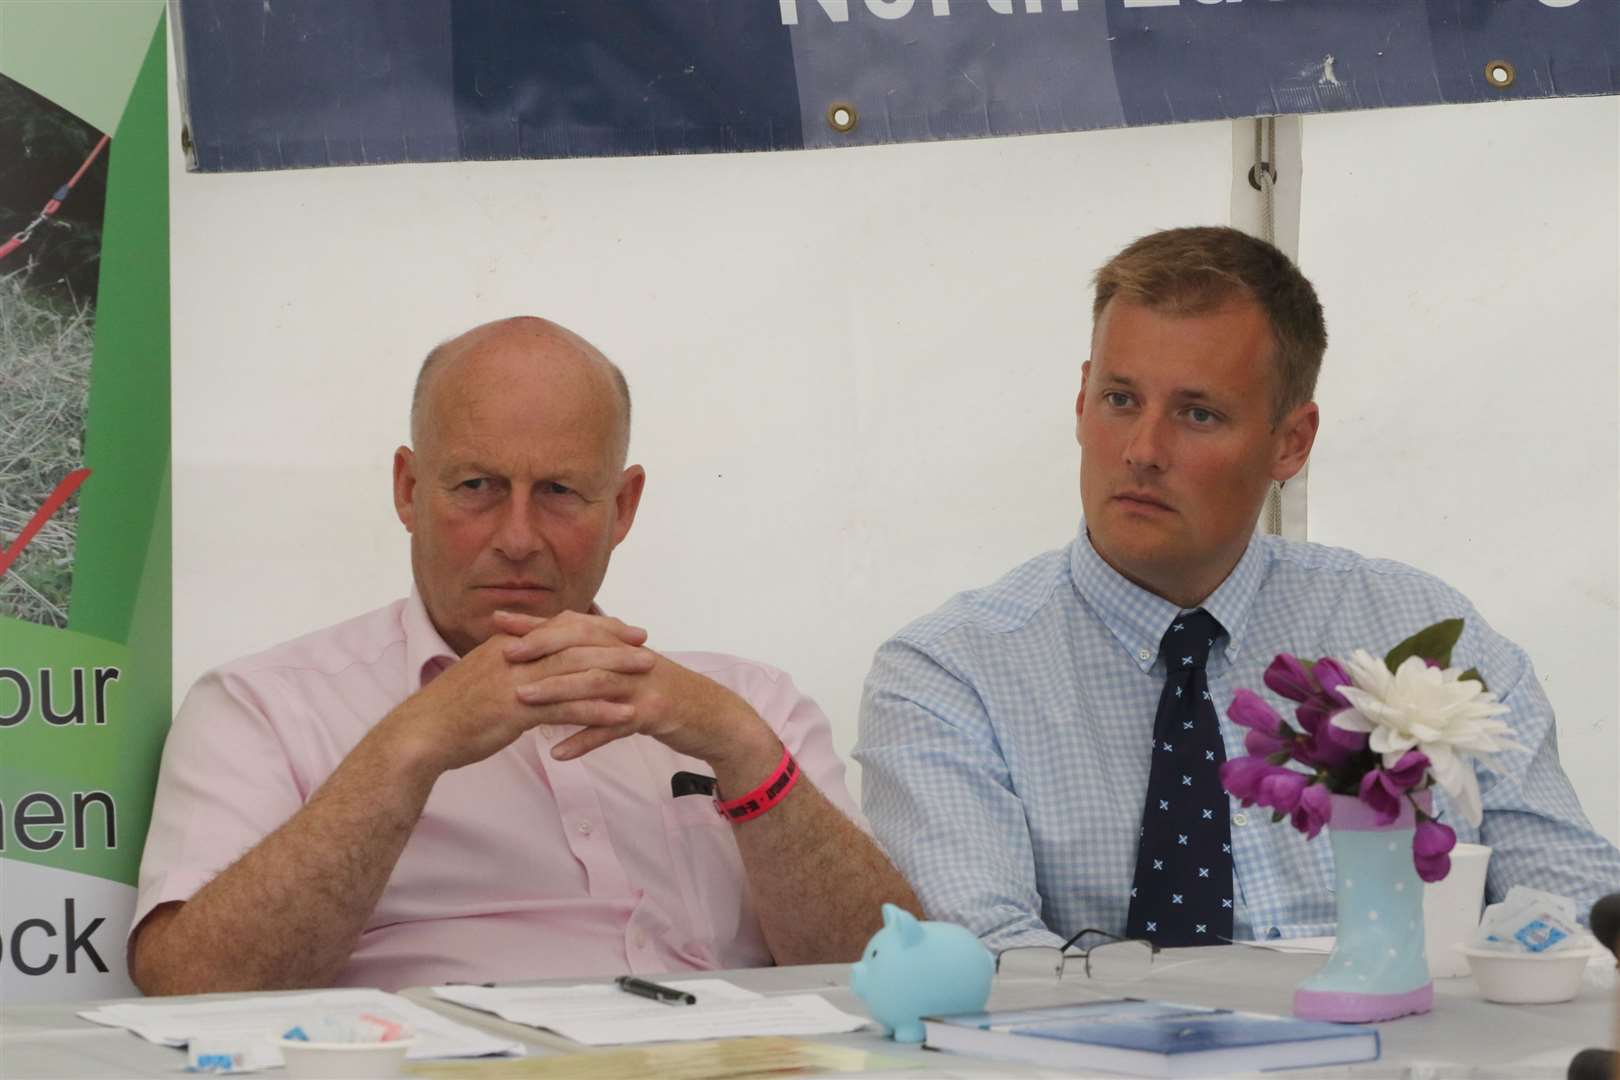 NFUS renewables coordinator Mike David and Muirden Energy director Alex Fowlie during the energy meeting...Picture: David Porter